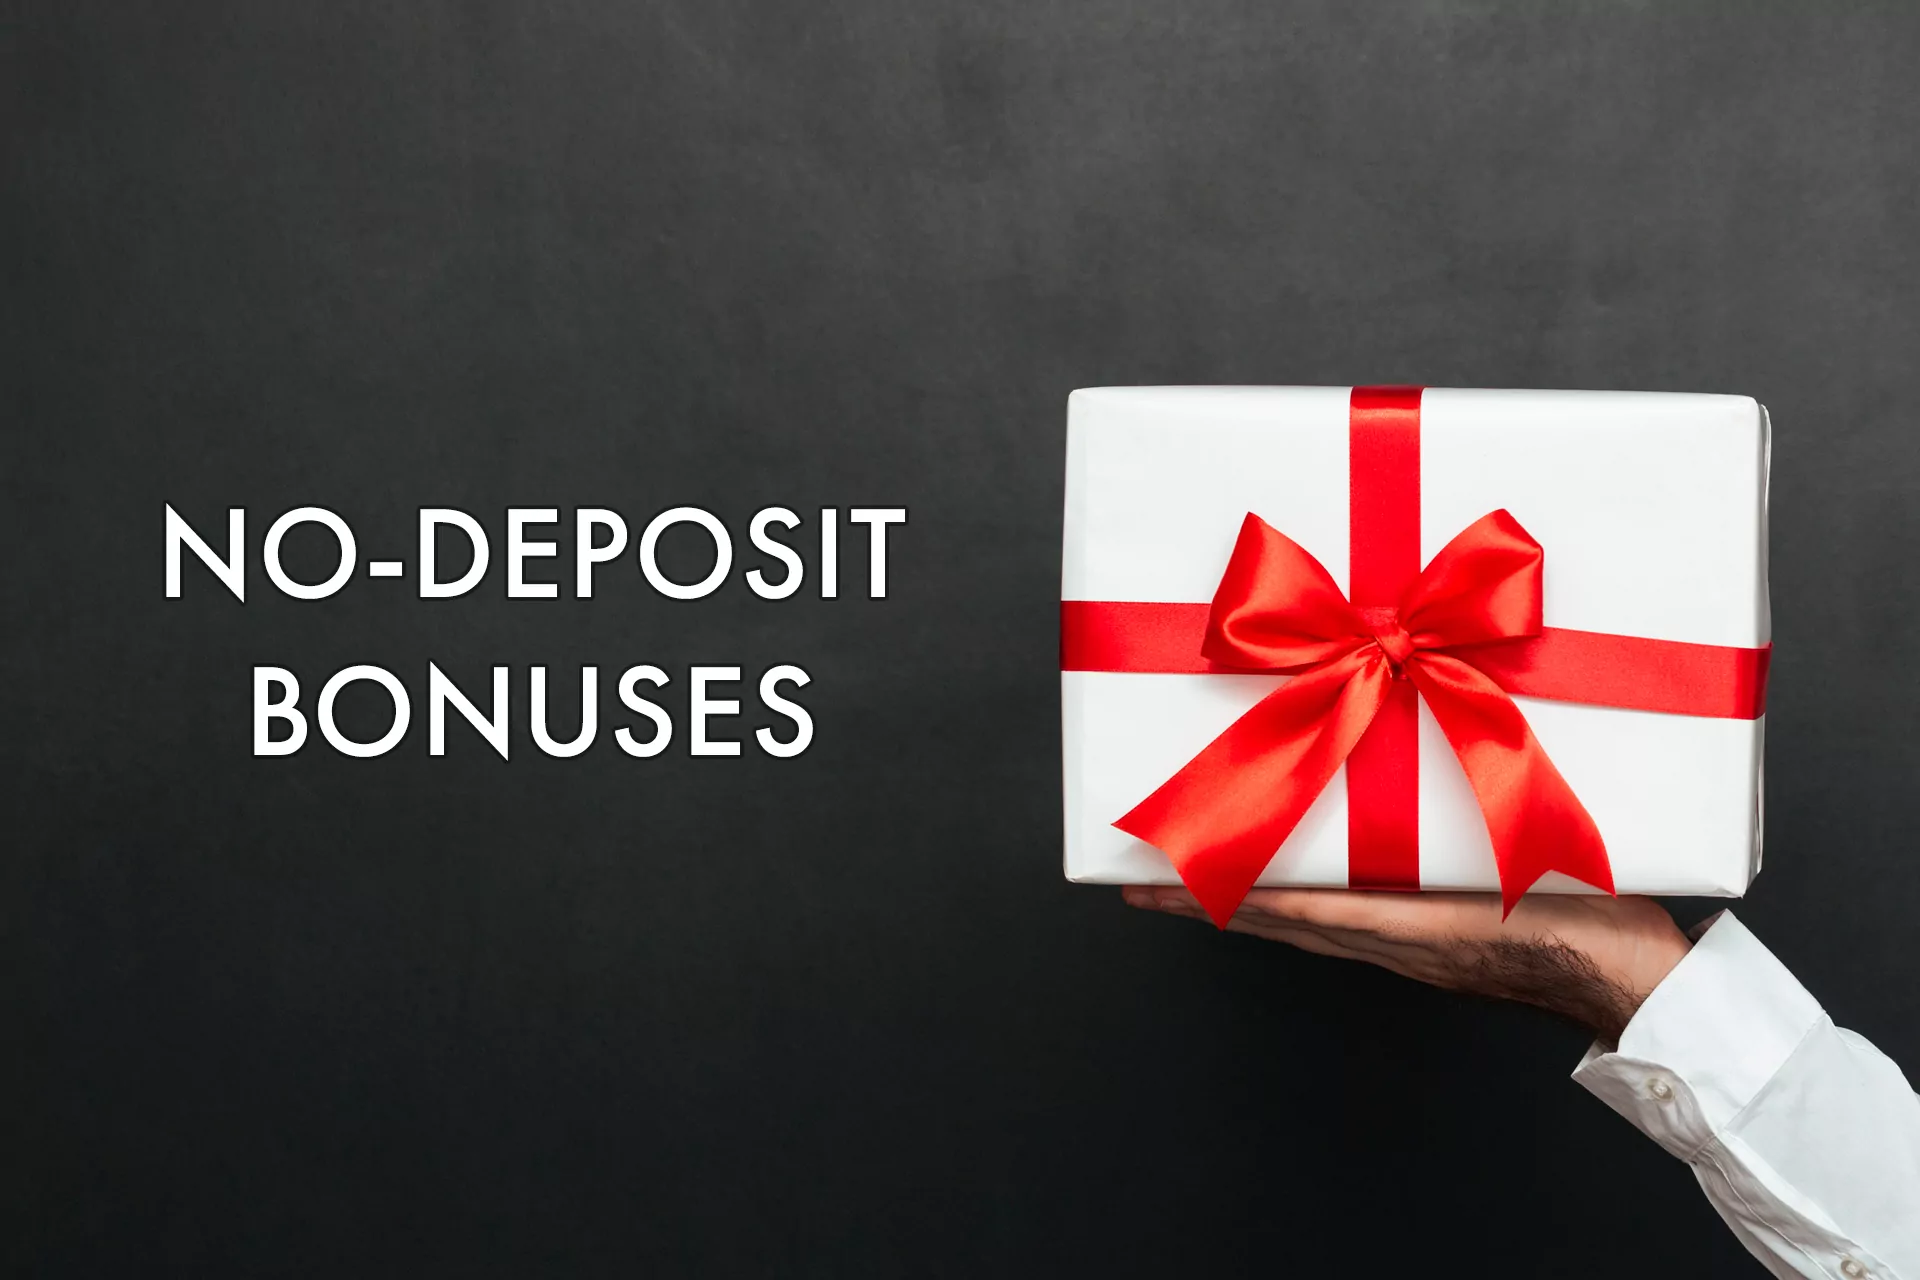 No-deposit bonus is a quite rare but attractive offer on the betting sites.